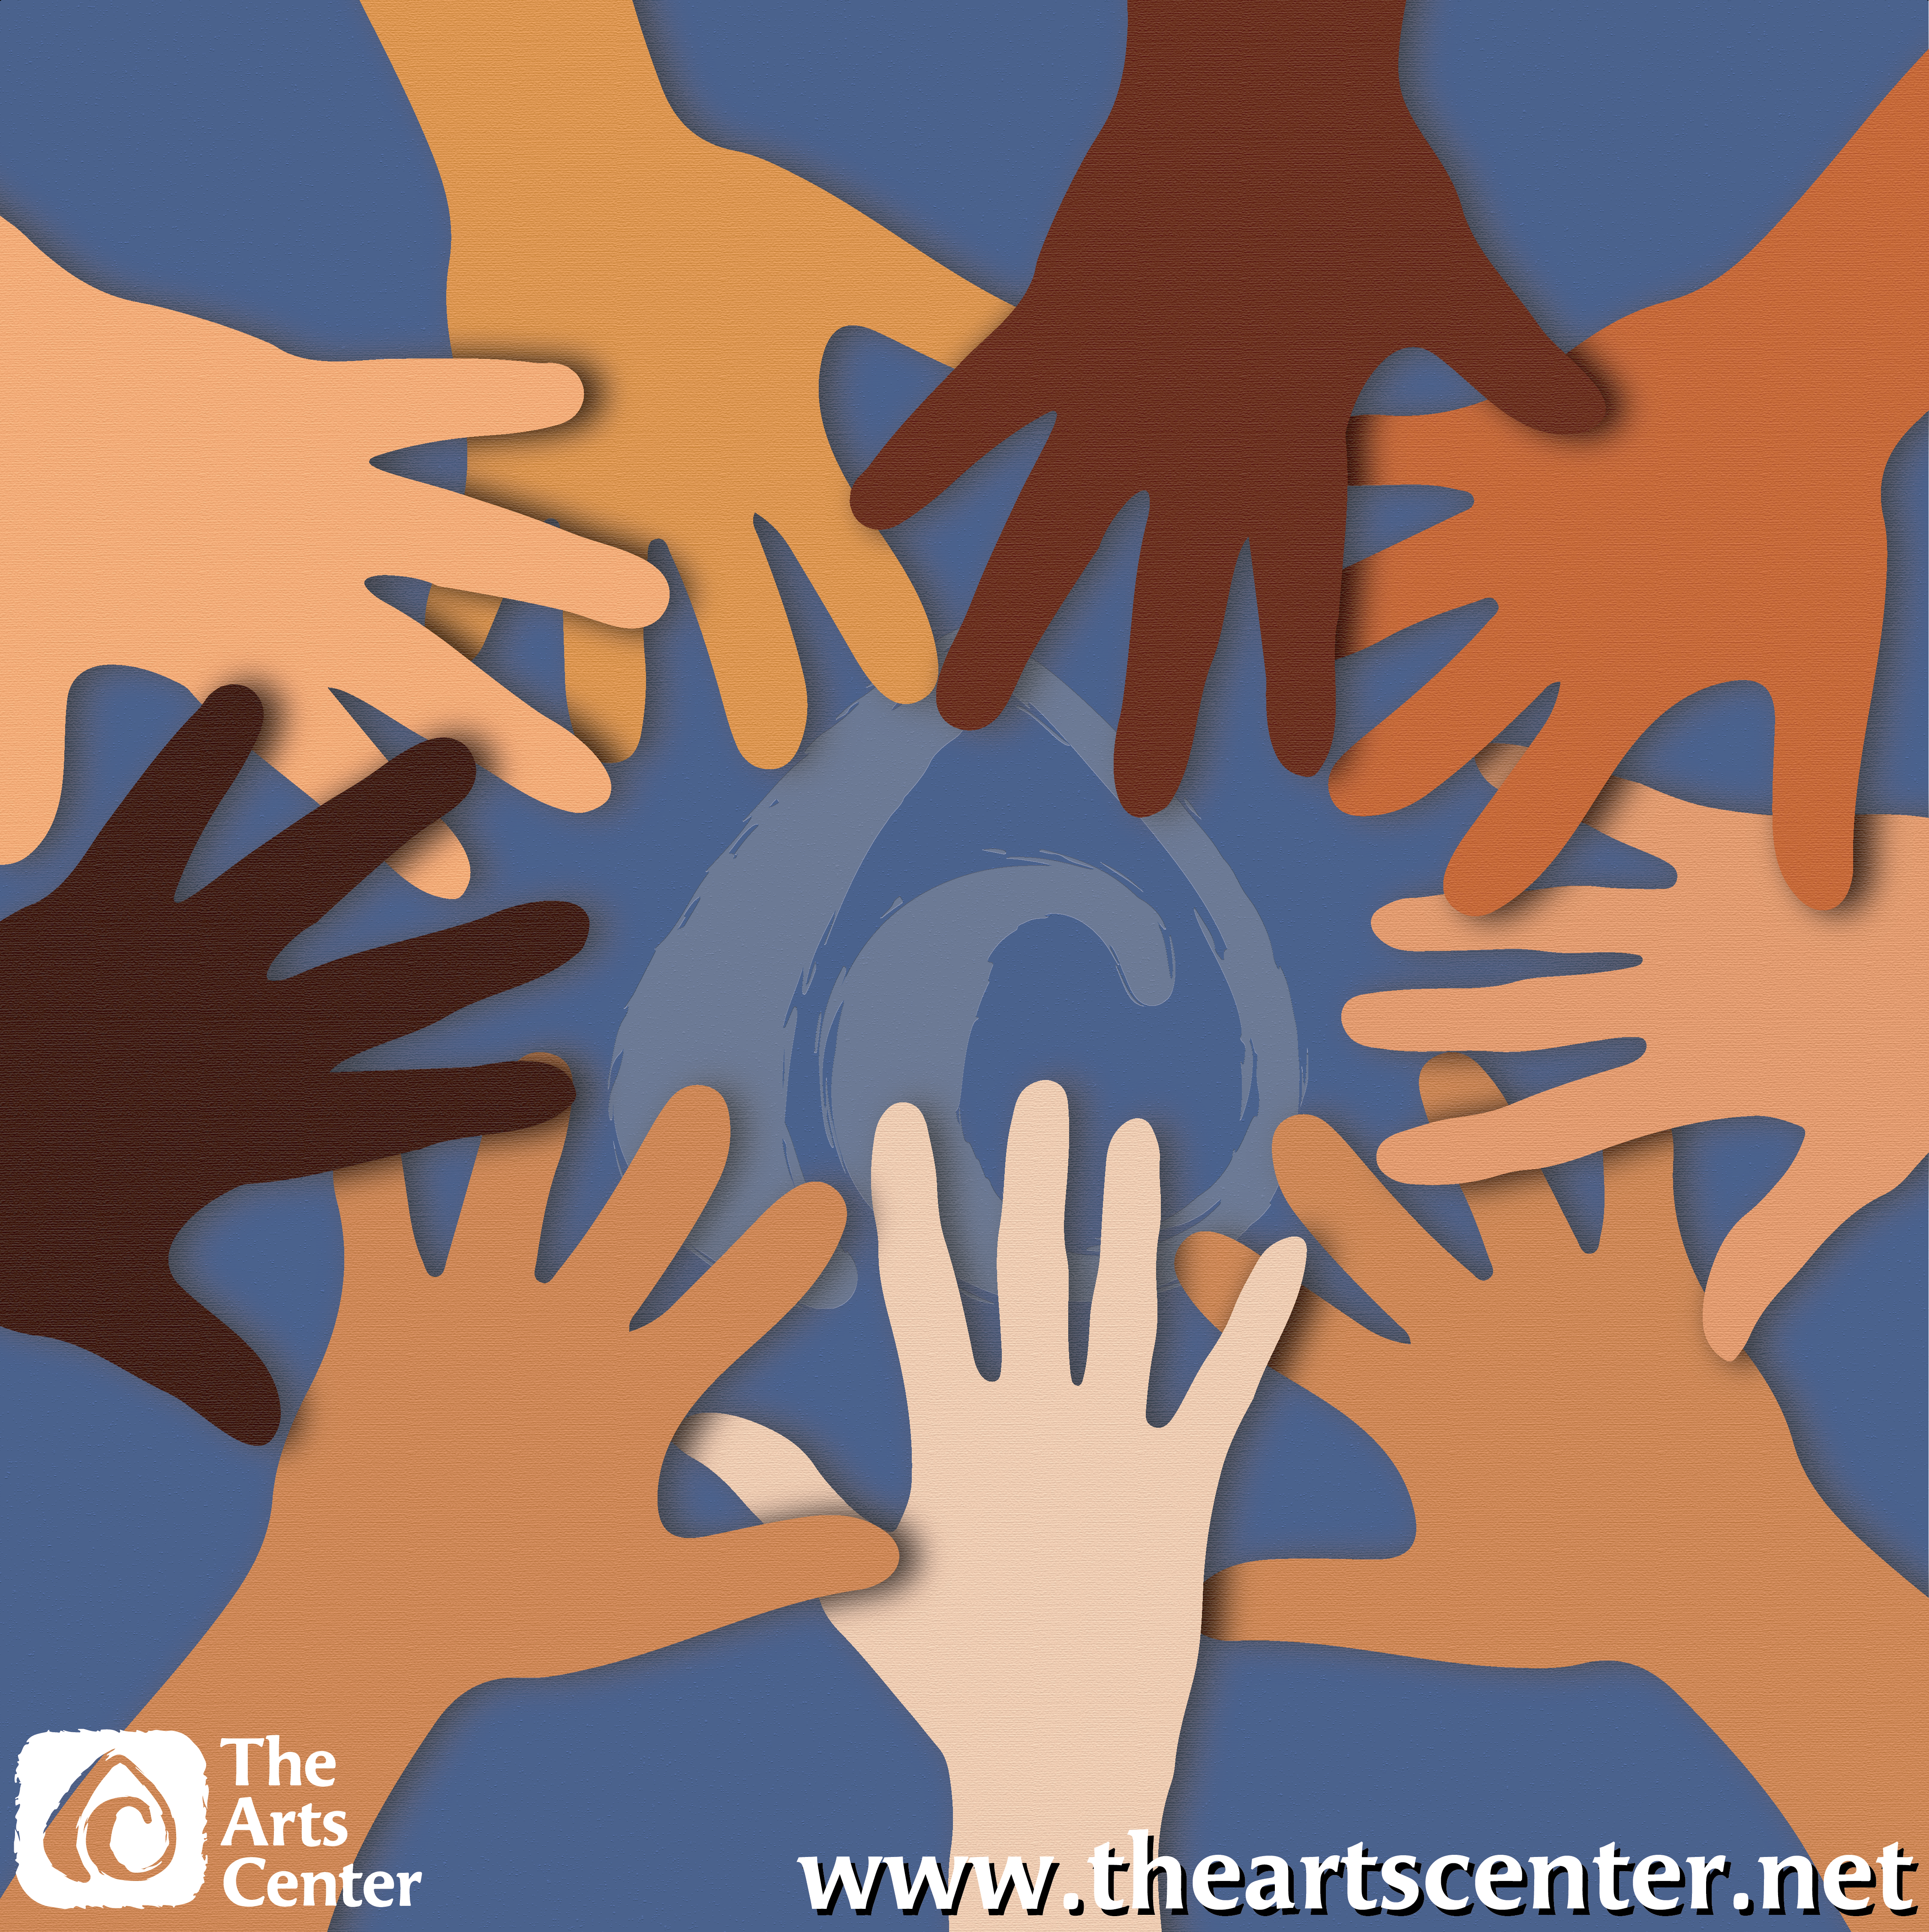 Multi-shaded hands symbolizing people from different backgrounds working together